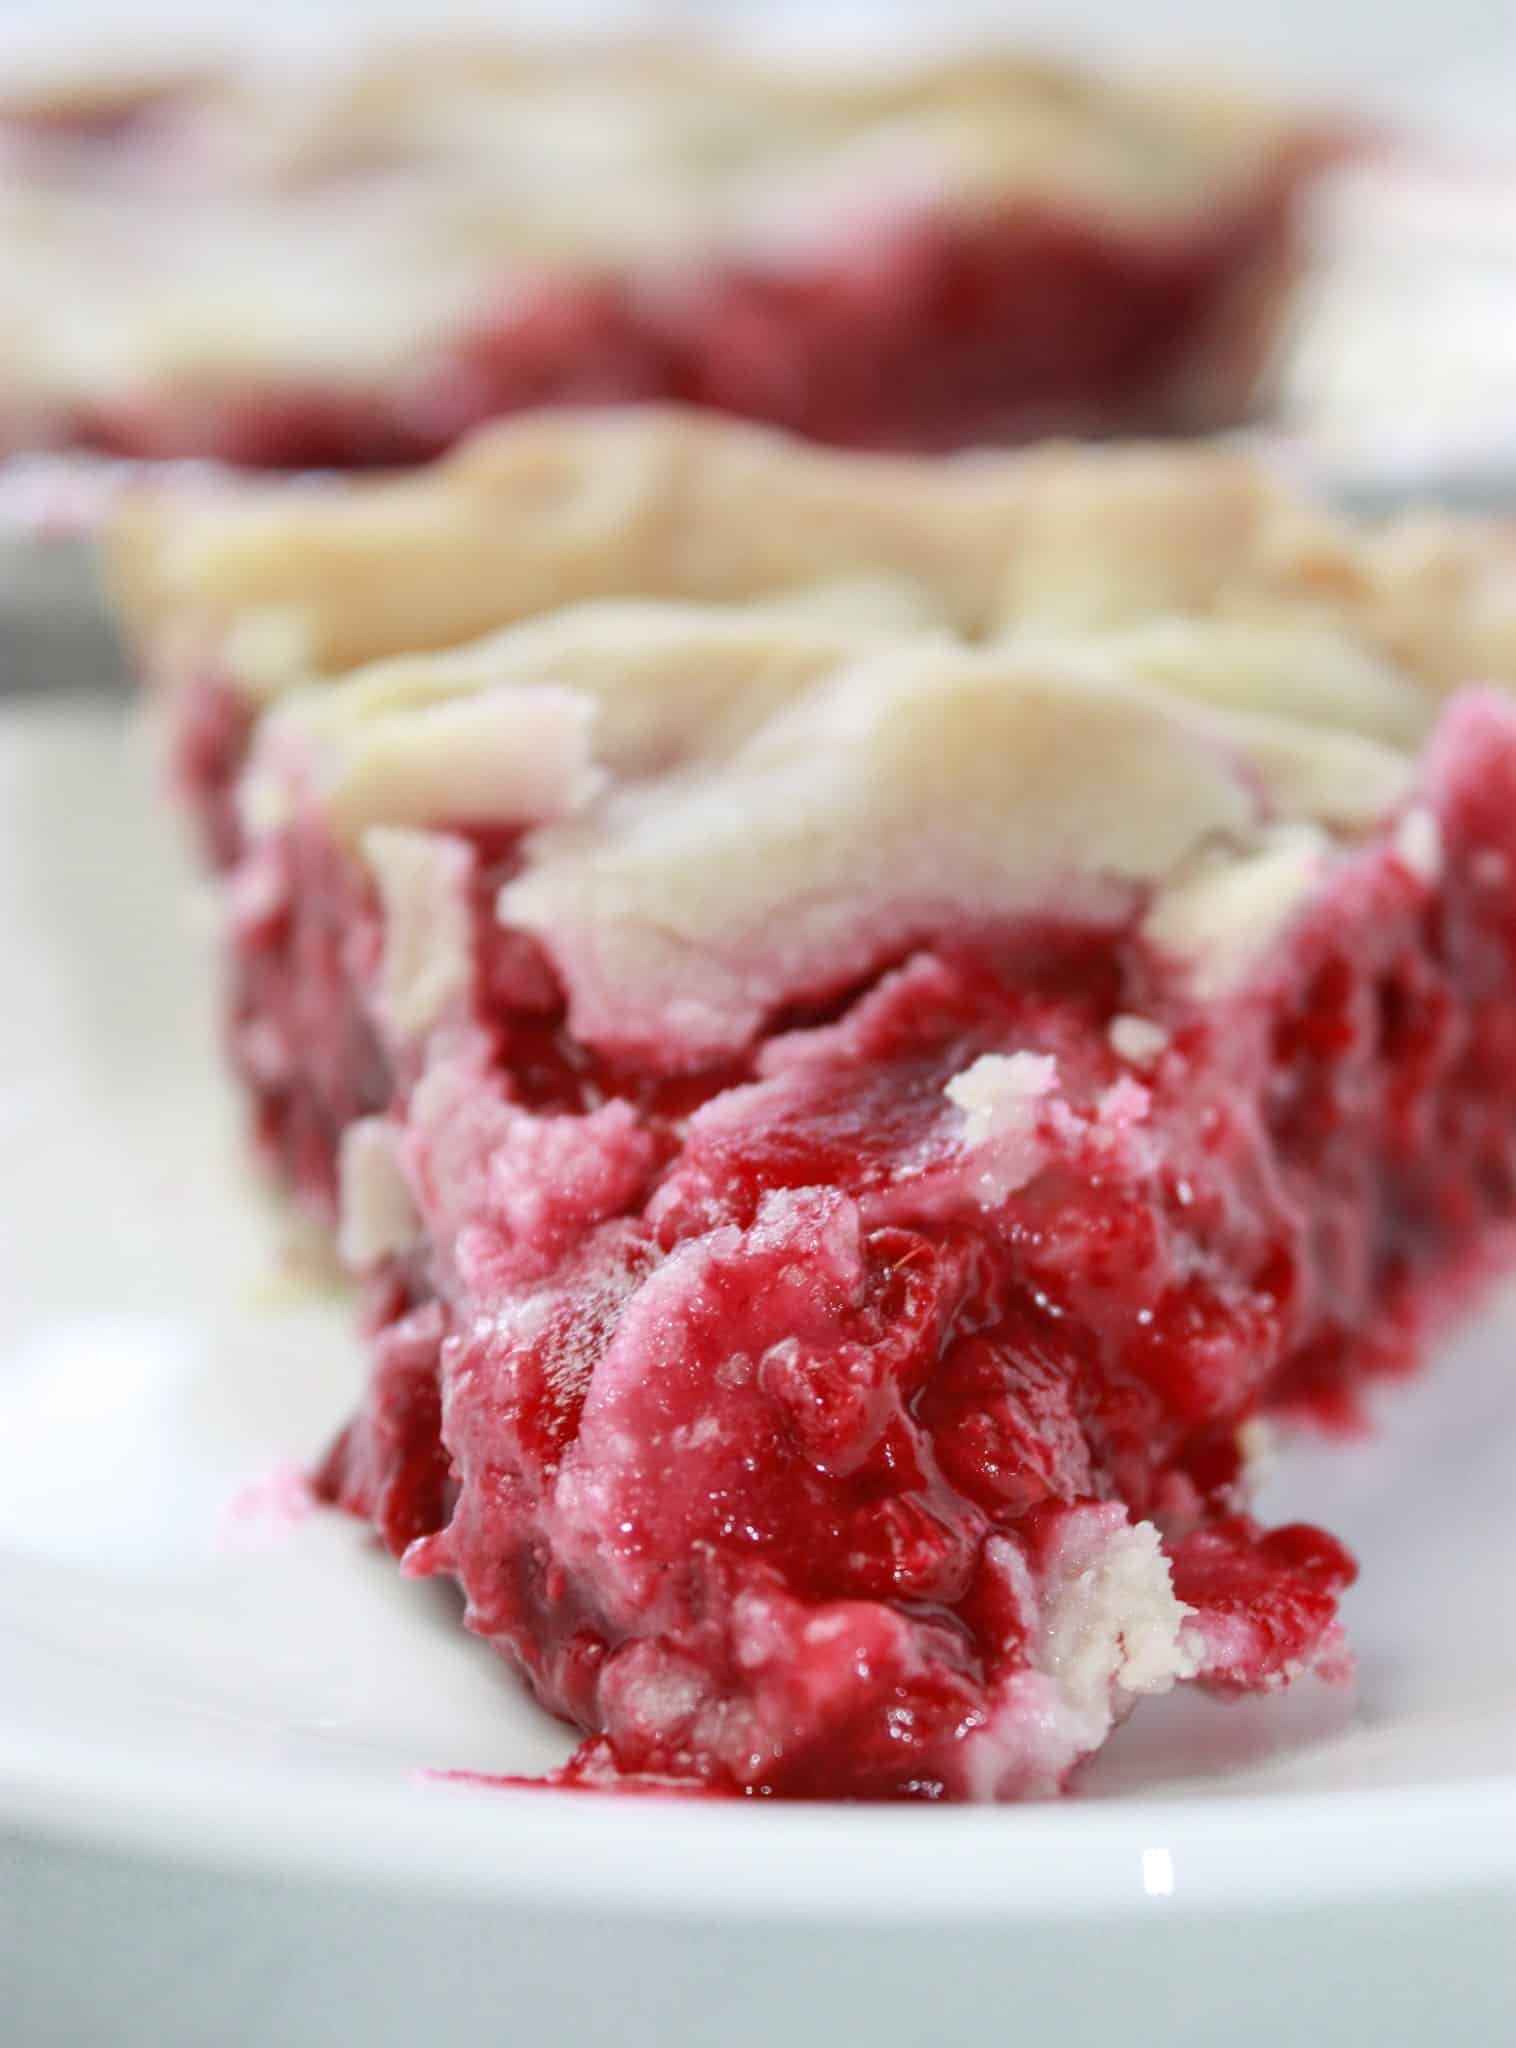 Raspberry Pie is a popular baking creation in our family.  This easy, gluten free, fruit filled dessert can be a great finish to a family meal.